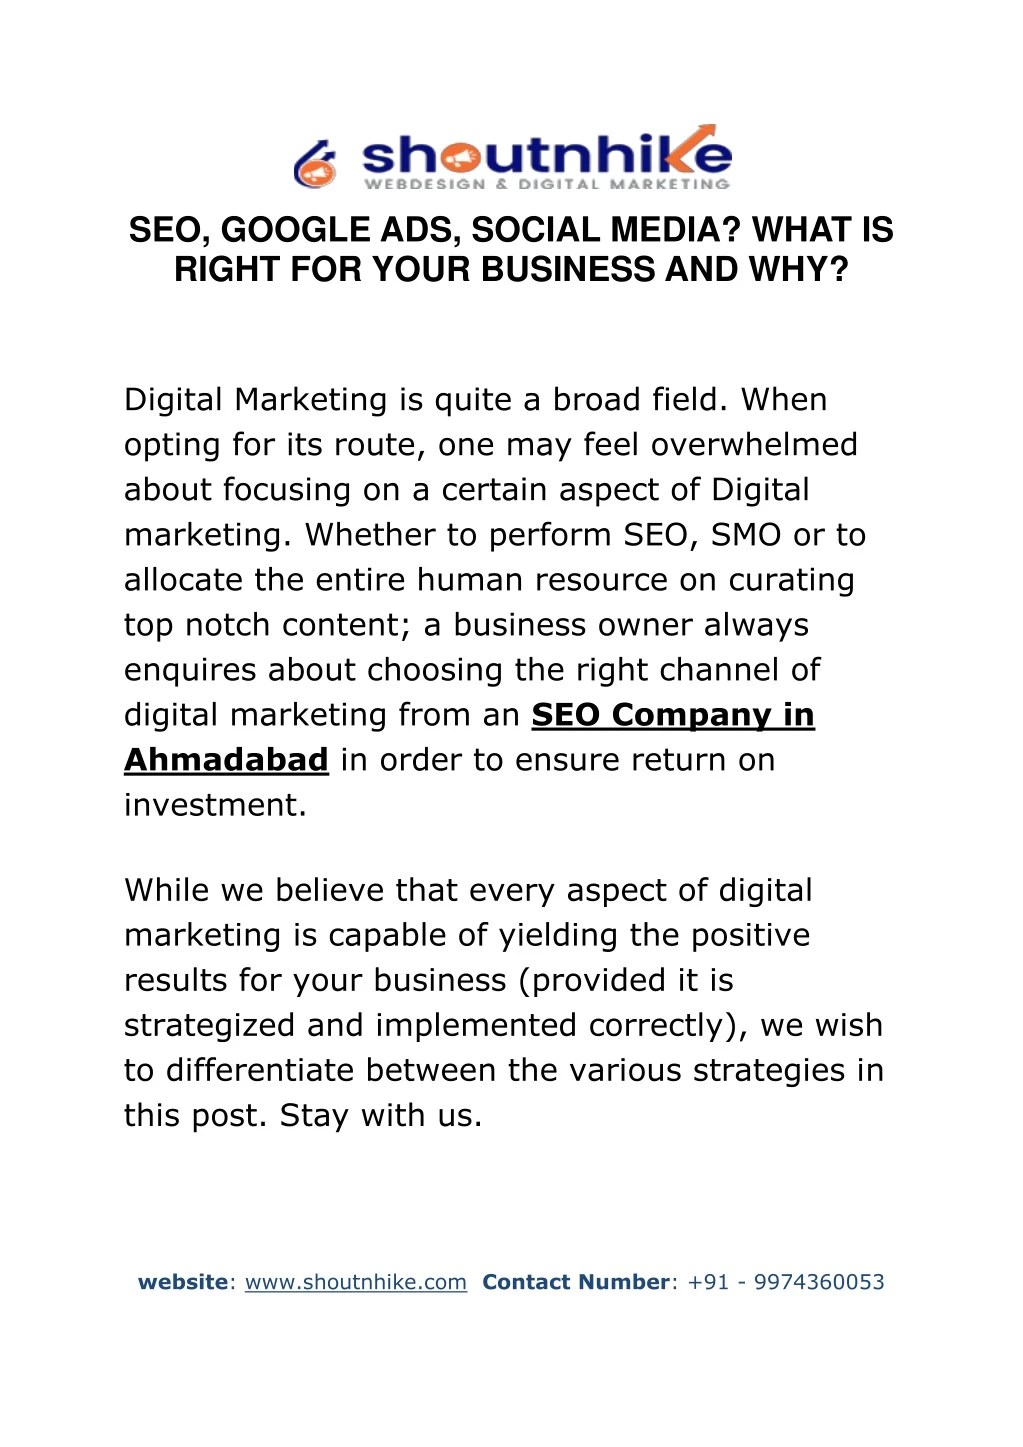 seo google ads social media what is right